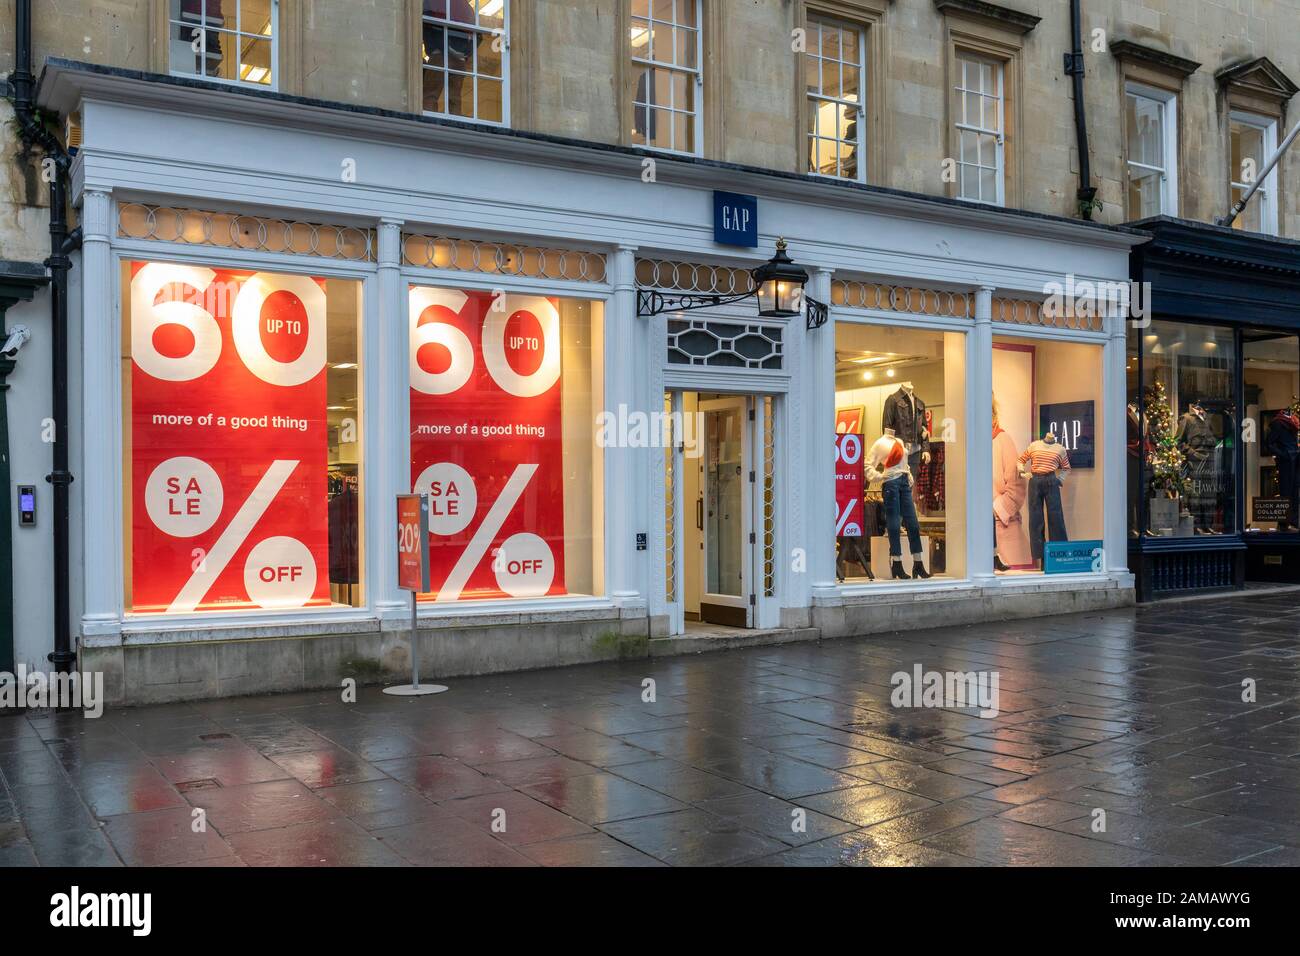 Up to 60% off January Sale at the Gap store in Bath, England, UK Stock Photo